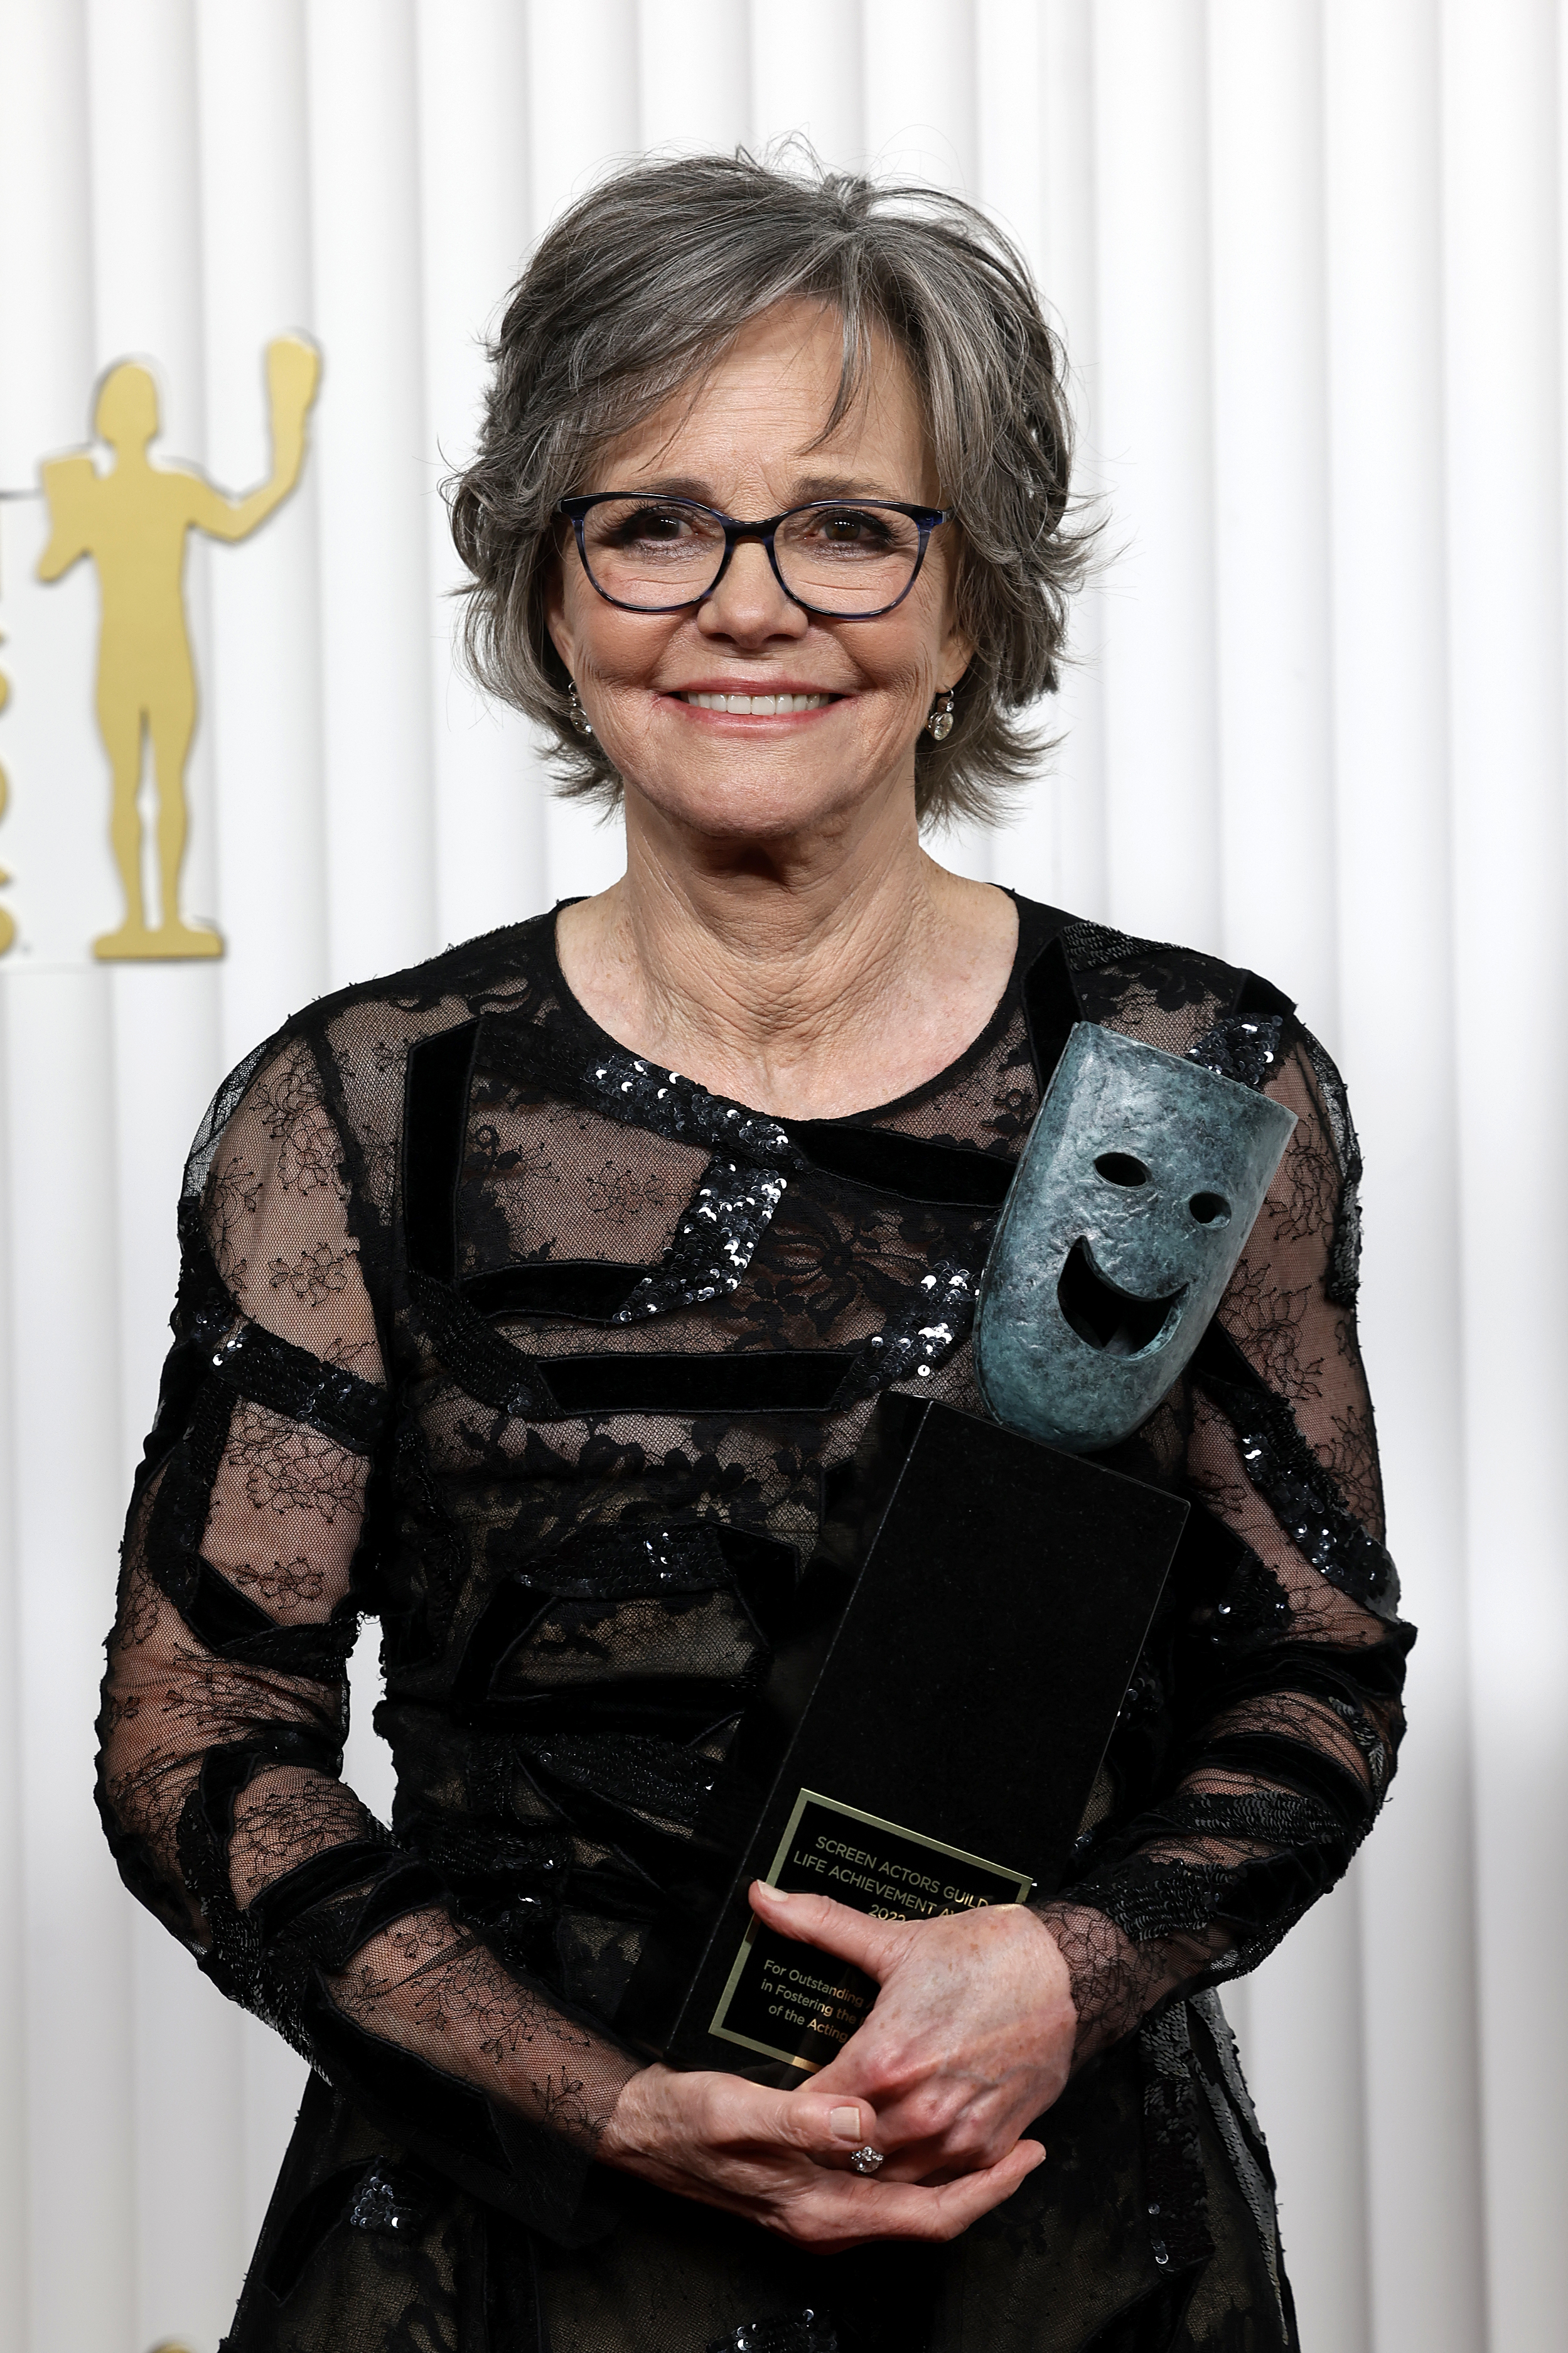 Sally Field during the 29th Annual Screen Actors Guild Awards in Los Angeles, California on February 26, 2023 | Source: Getty Images